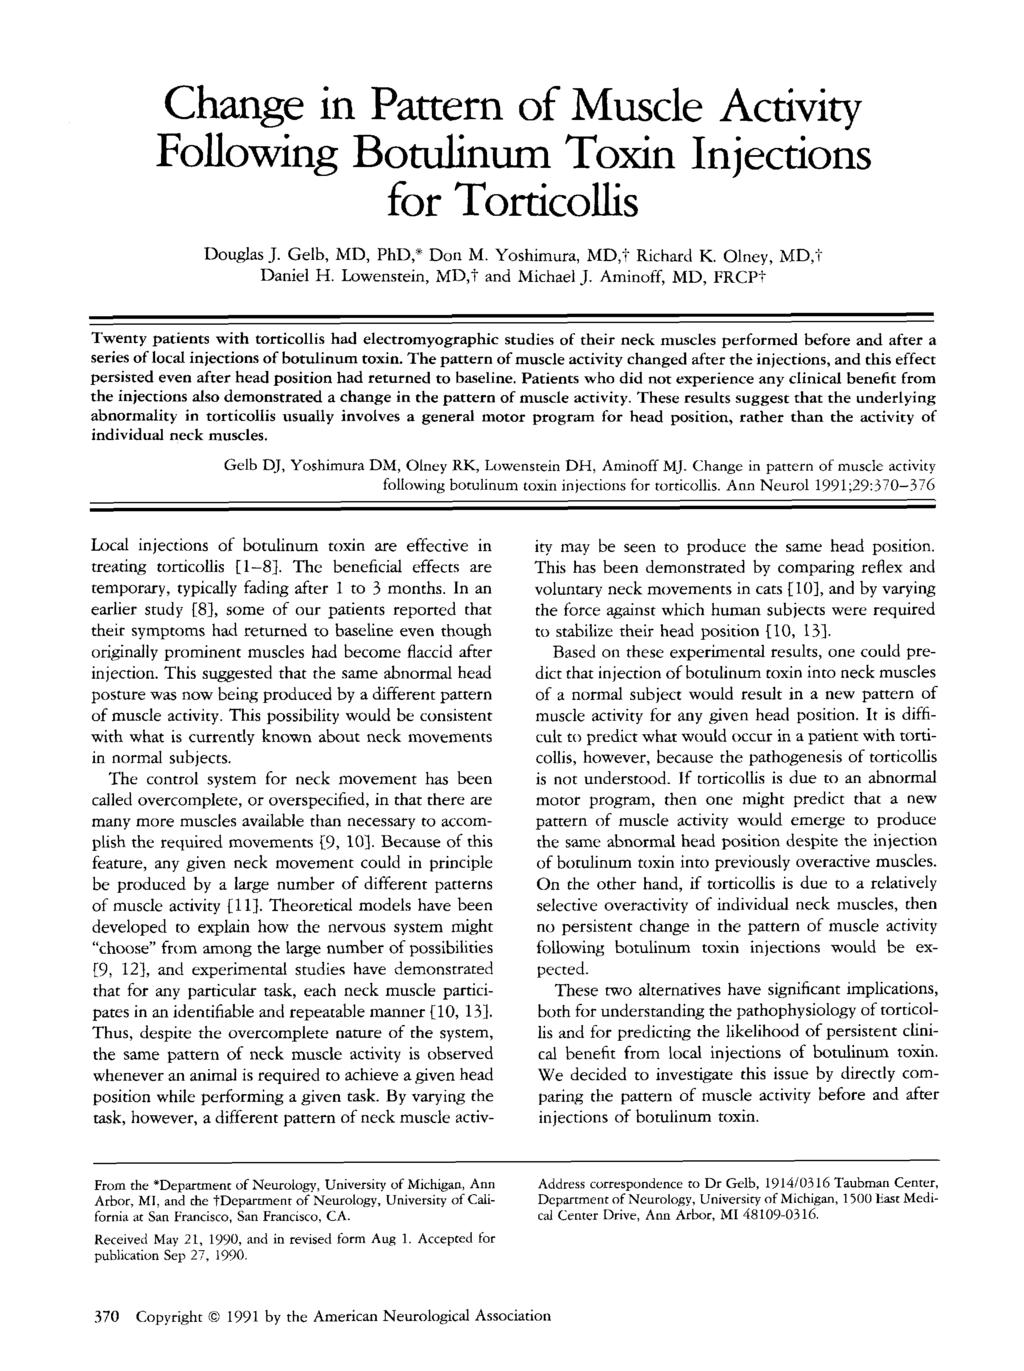 Change in Pattern of Muscle Activity Following Botulinum Toxin Injections for Torticohs Douglas J. Gelb, MD, PhD, Don M. Yoshimura, MD,? Richard K. Olney, MD,? Daniel H. Lowenstein, MD,?